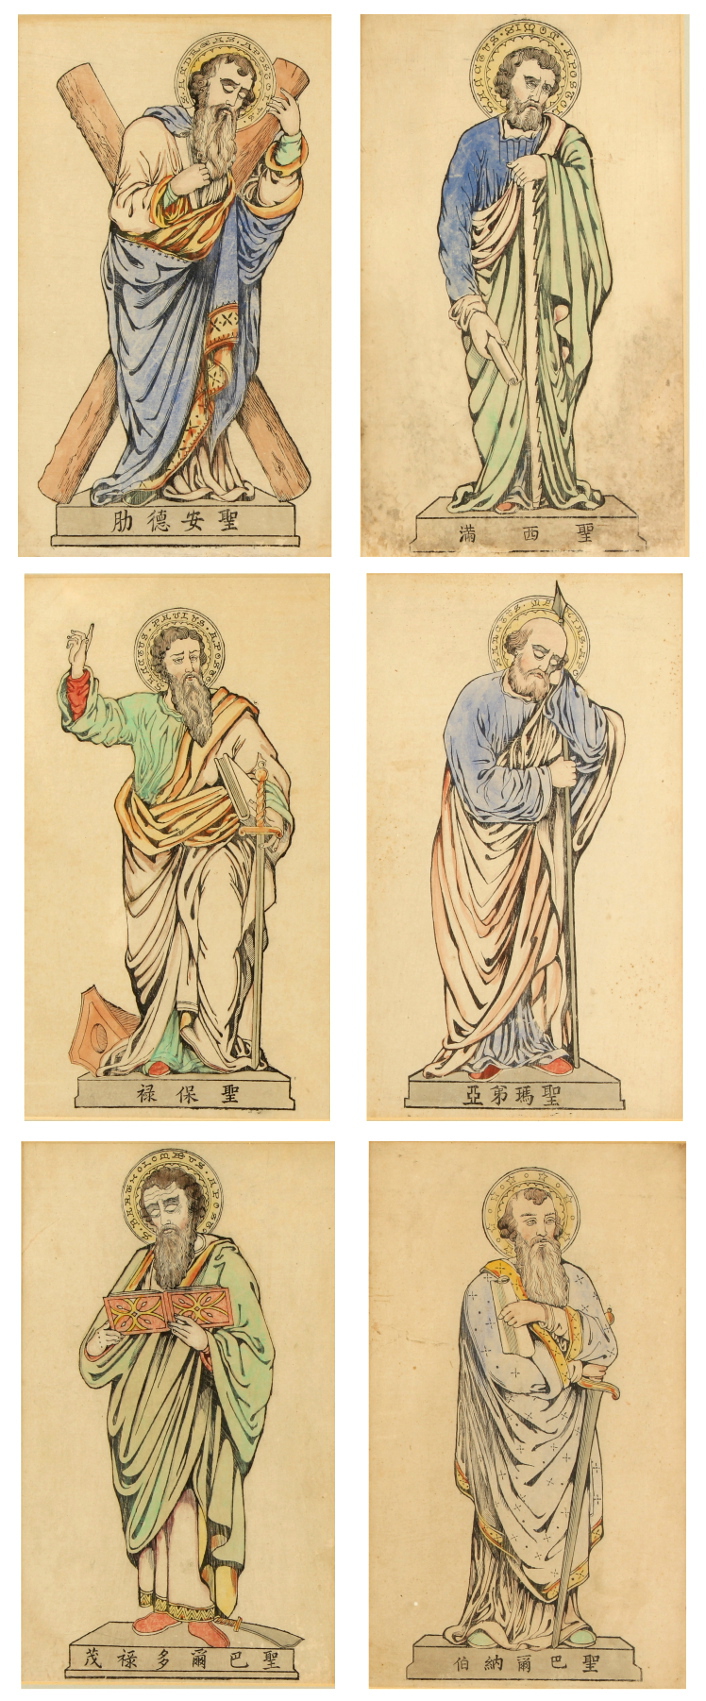 Property of a deceased estate - a set of six woodcuts or woodblock prints depicting Saints, possibly